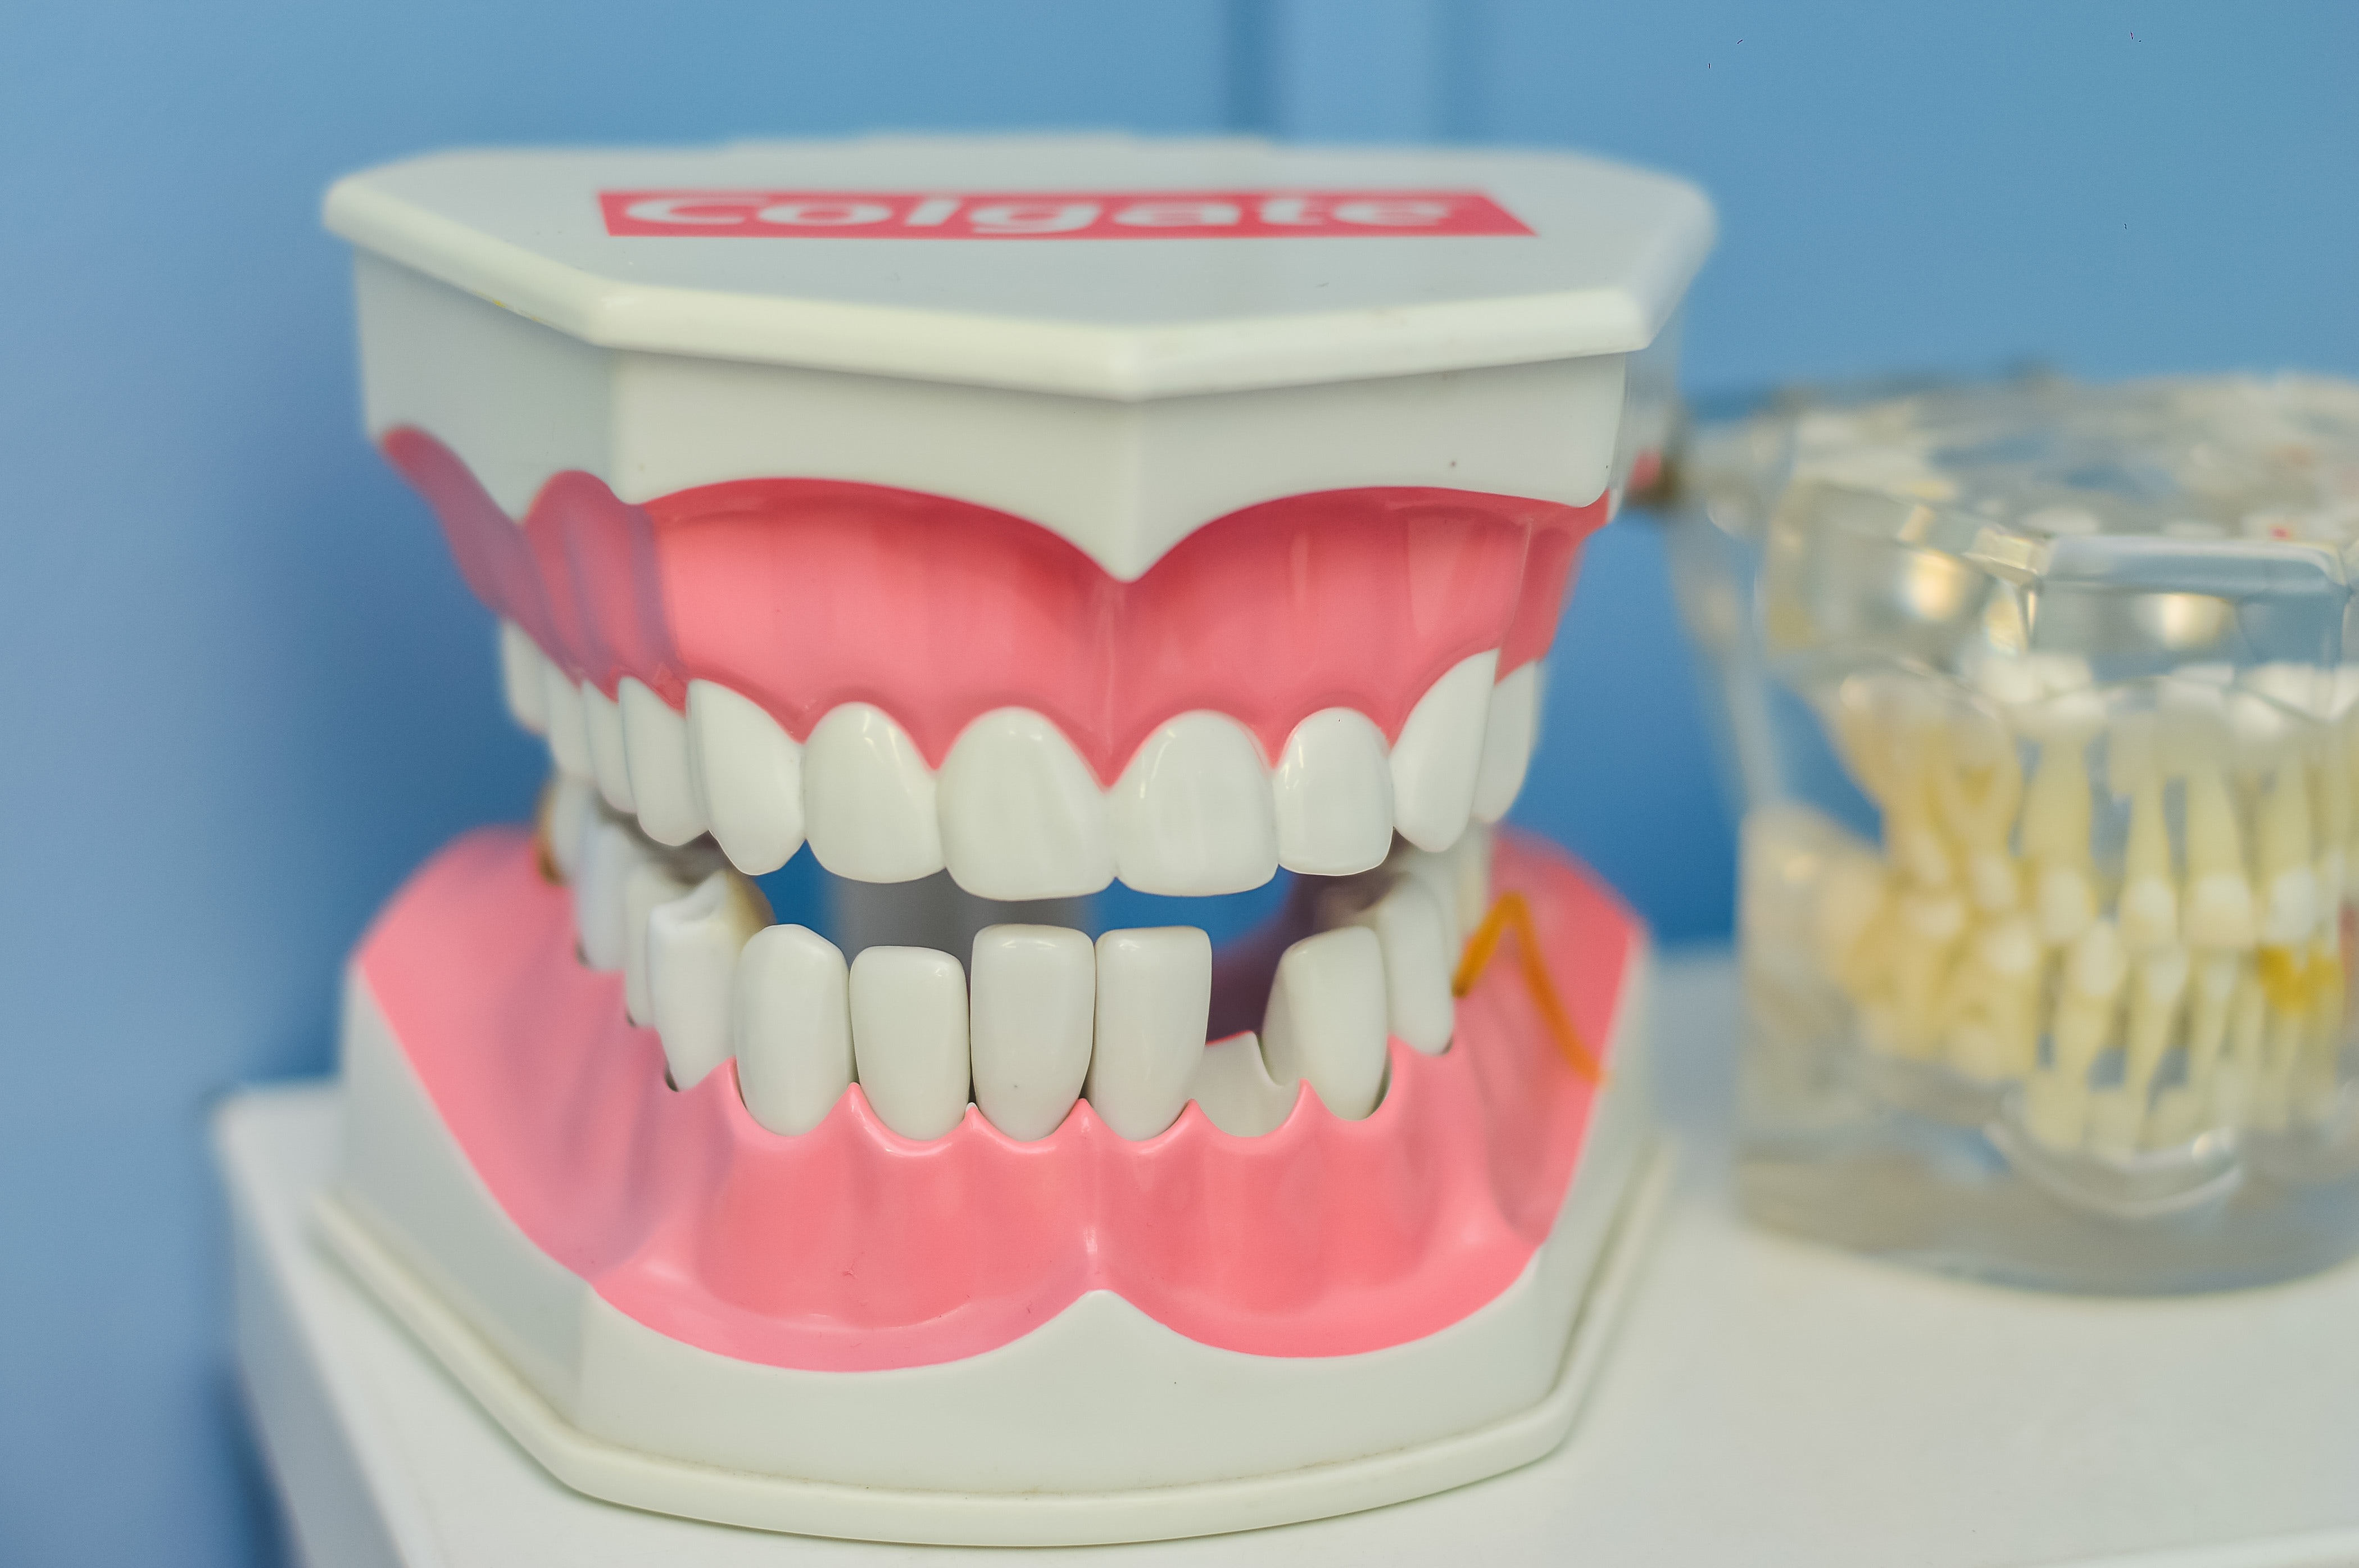 white and pink dentures